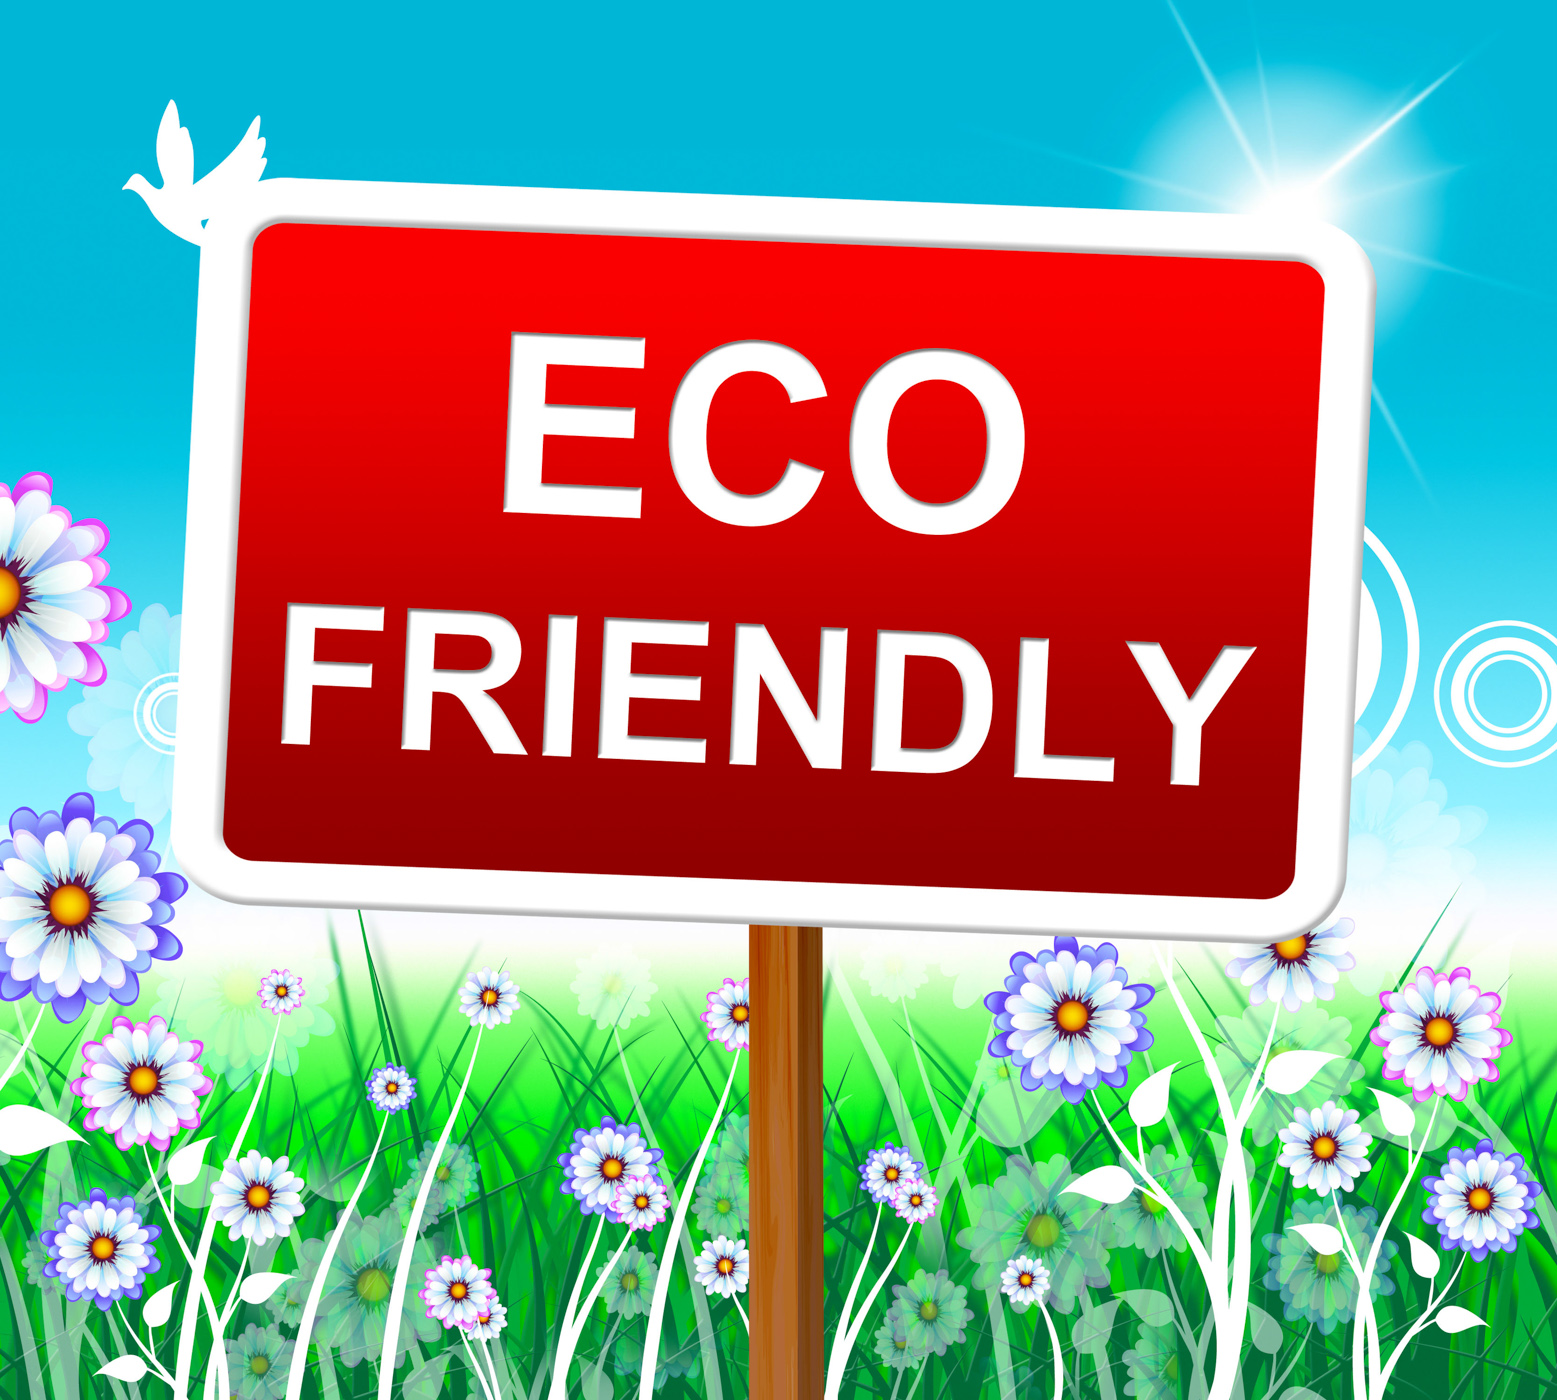 Eco friendly indicates earth day and conservation photo